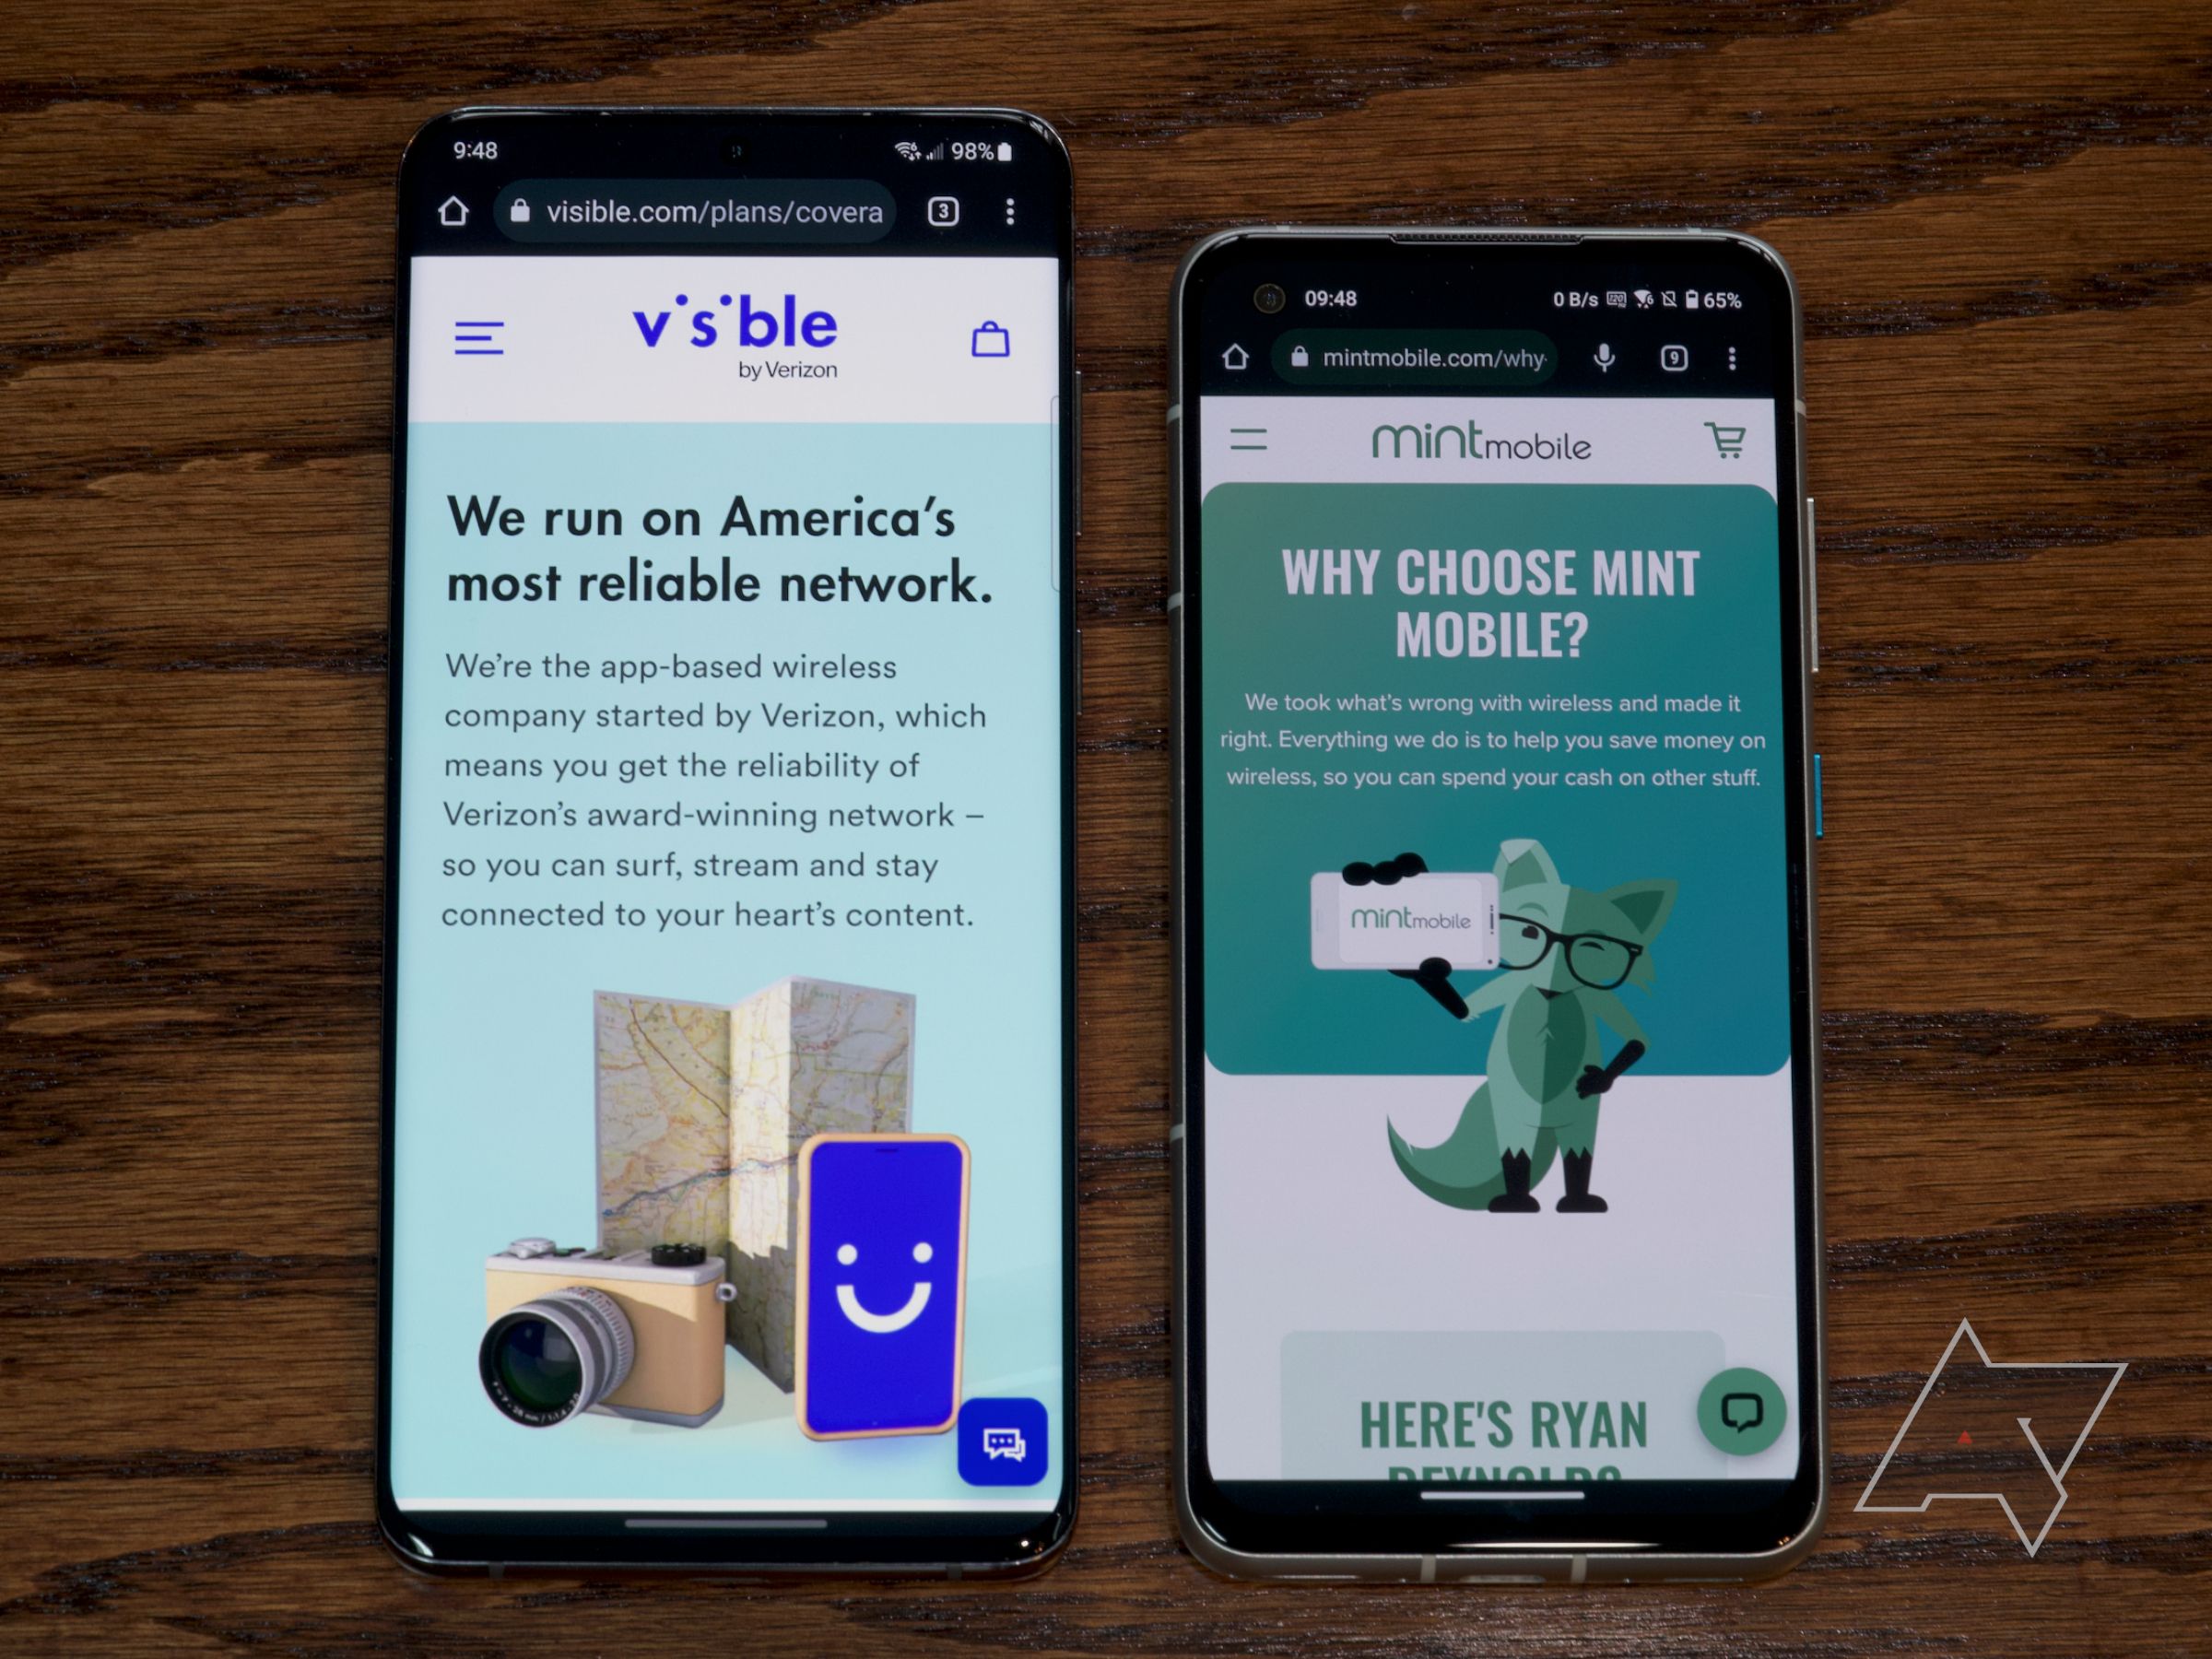 Visible and Mint Mobile websites on Android phones